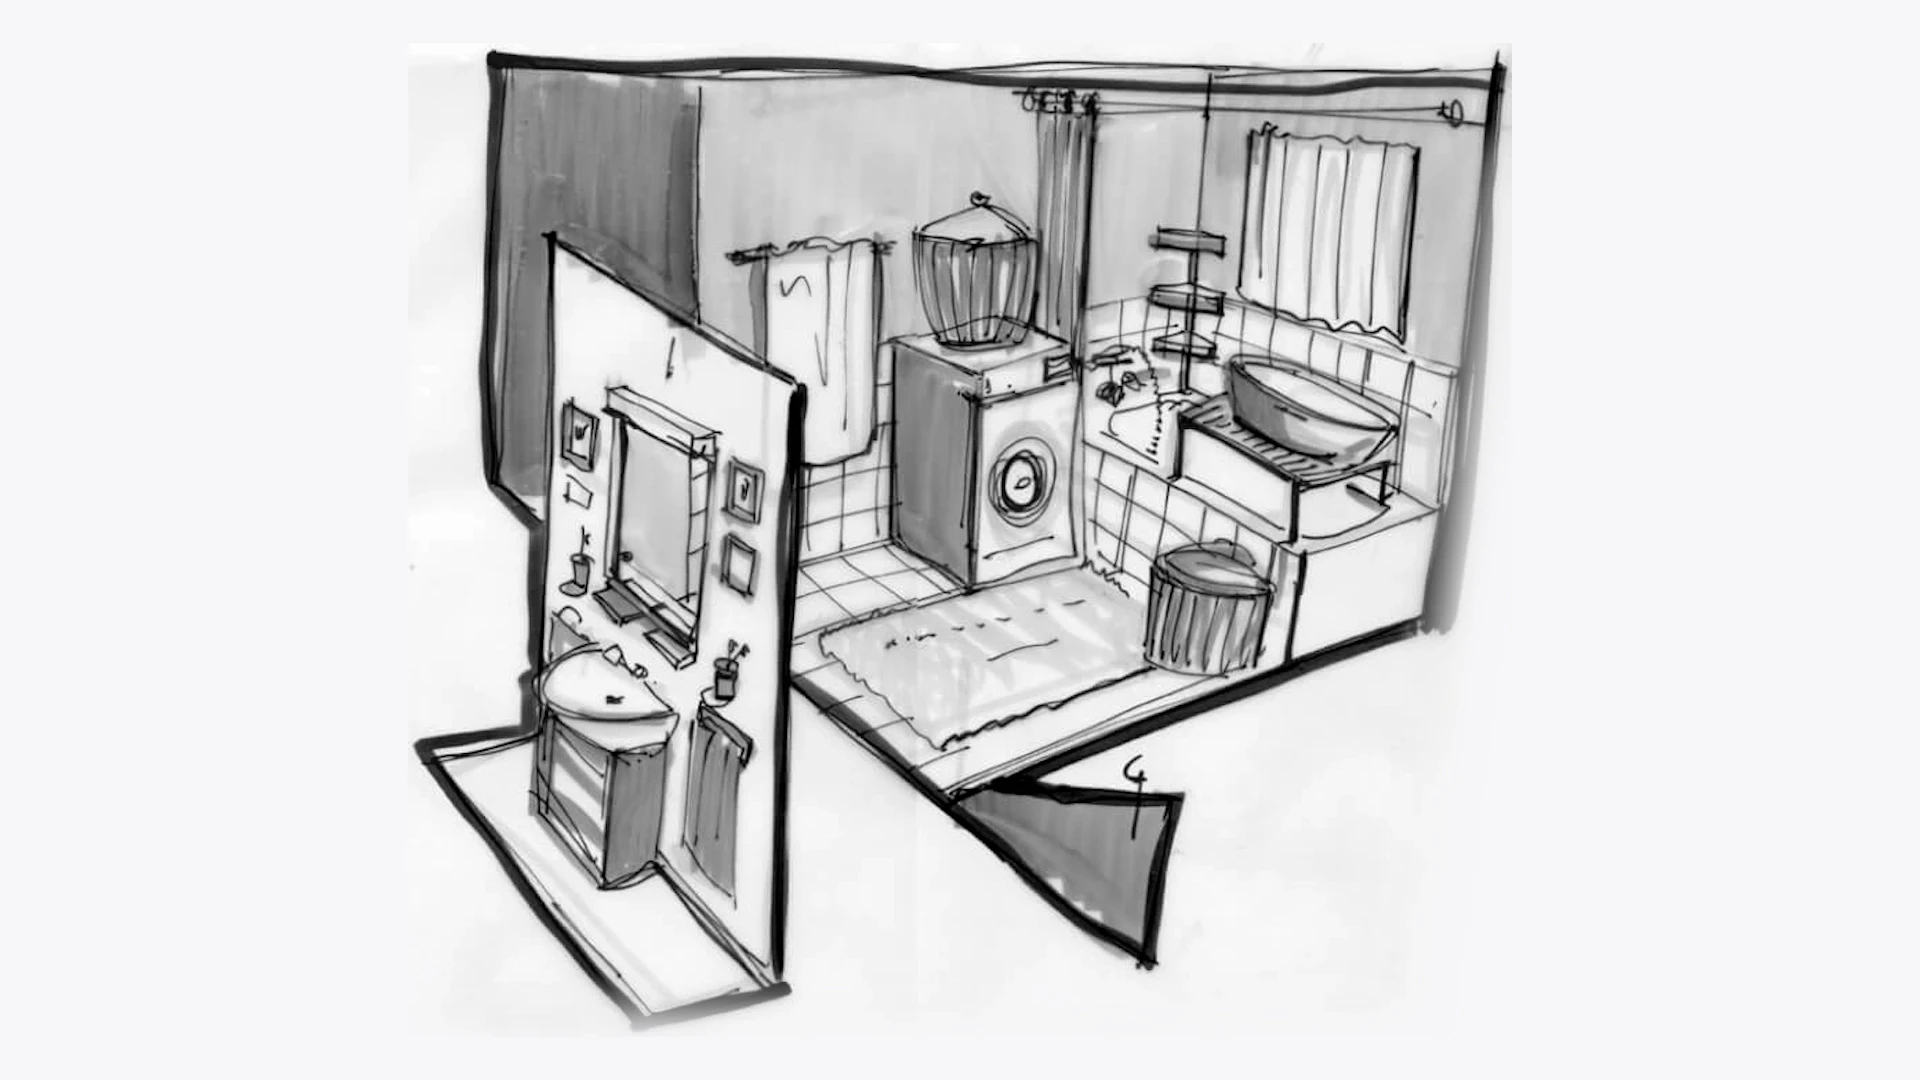 Sketch of the set